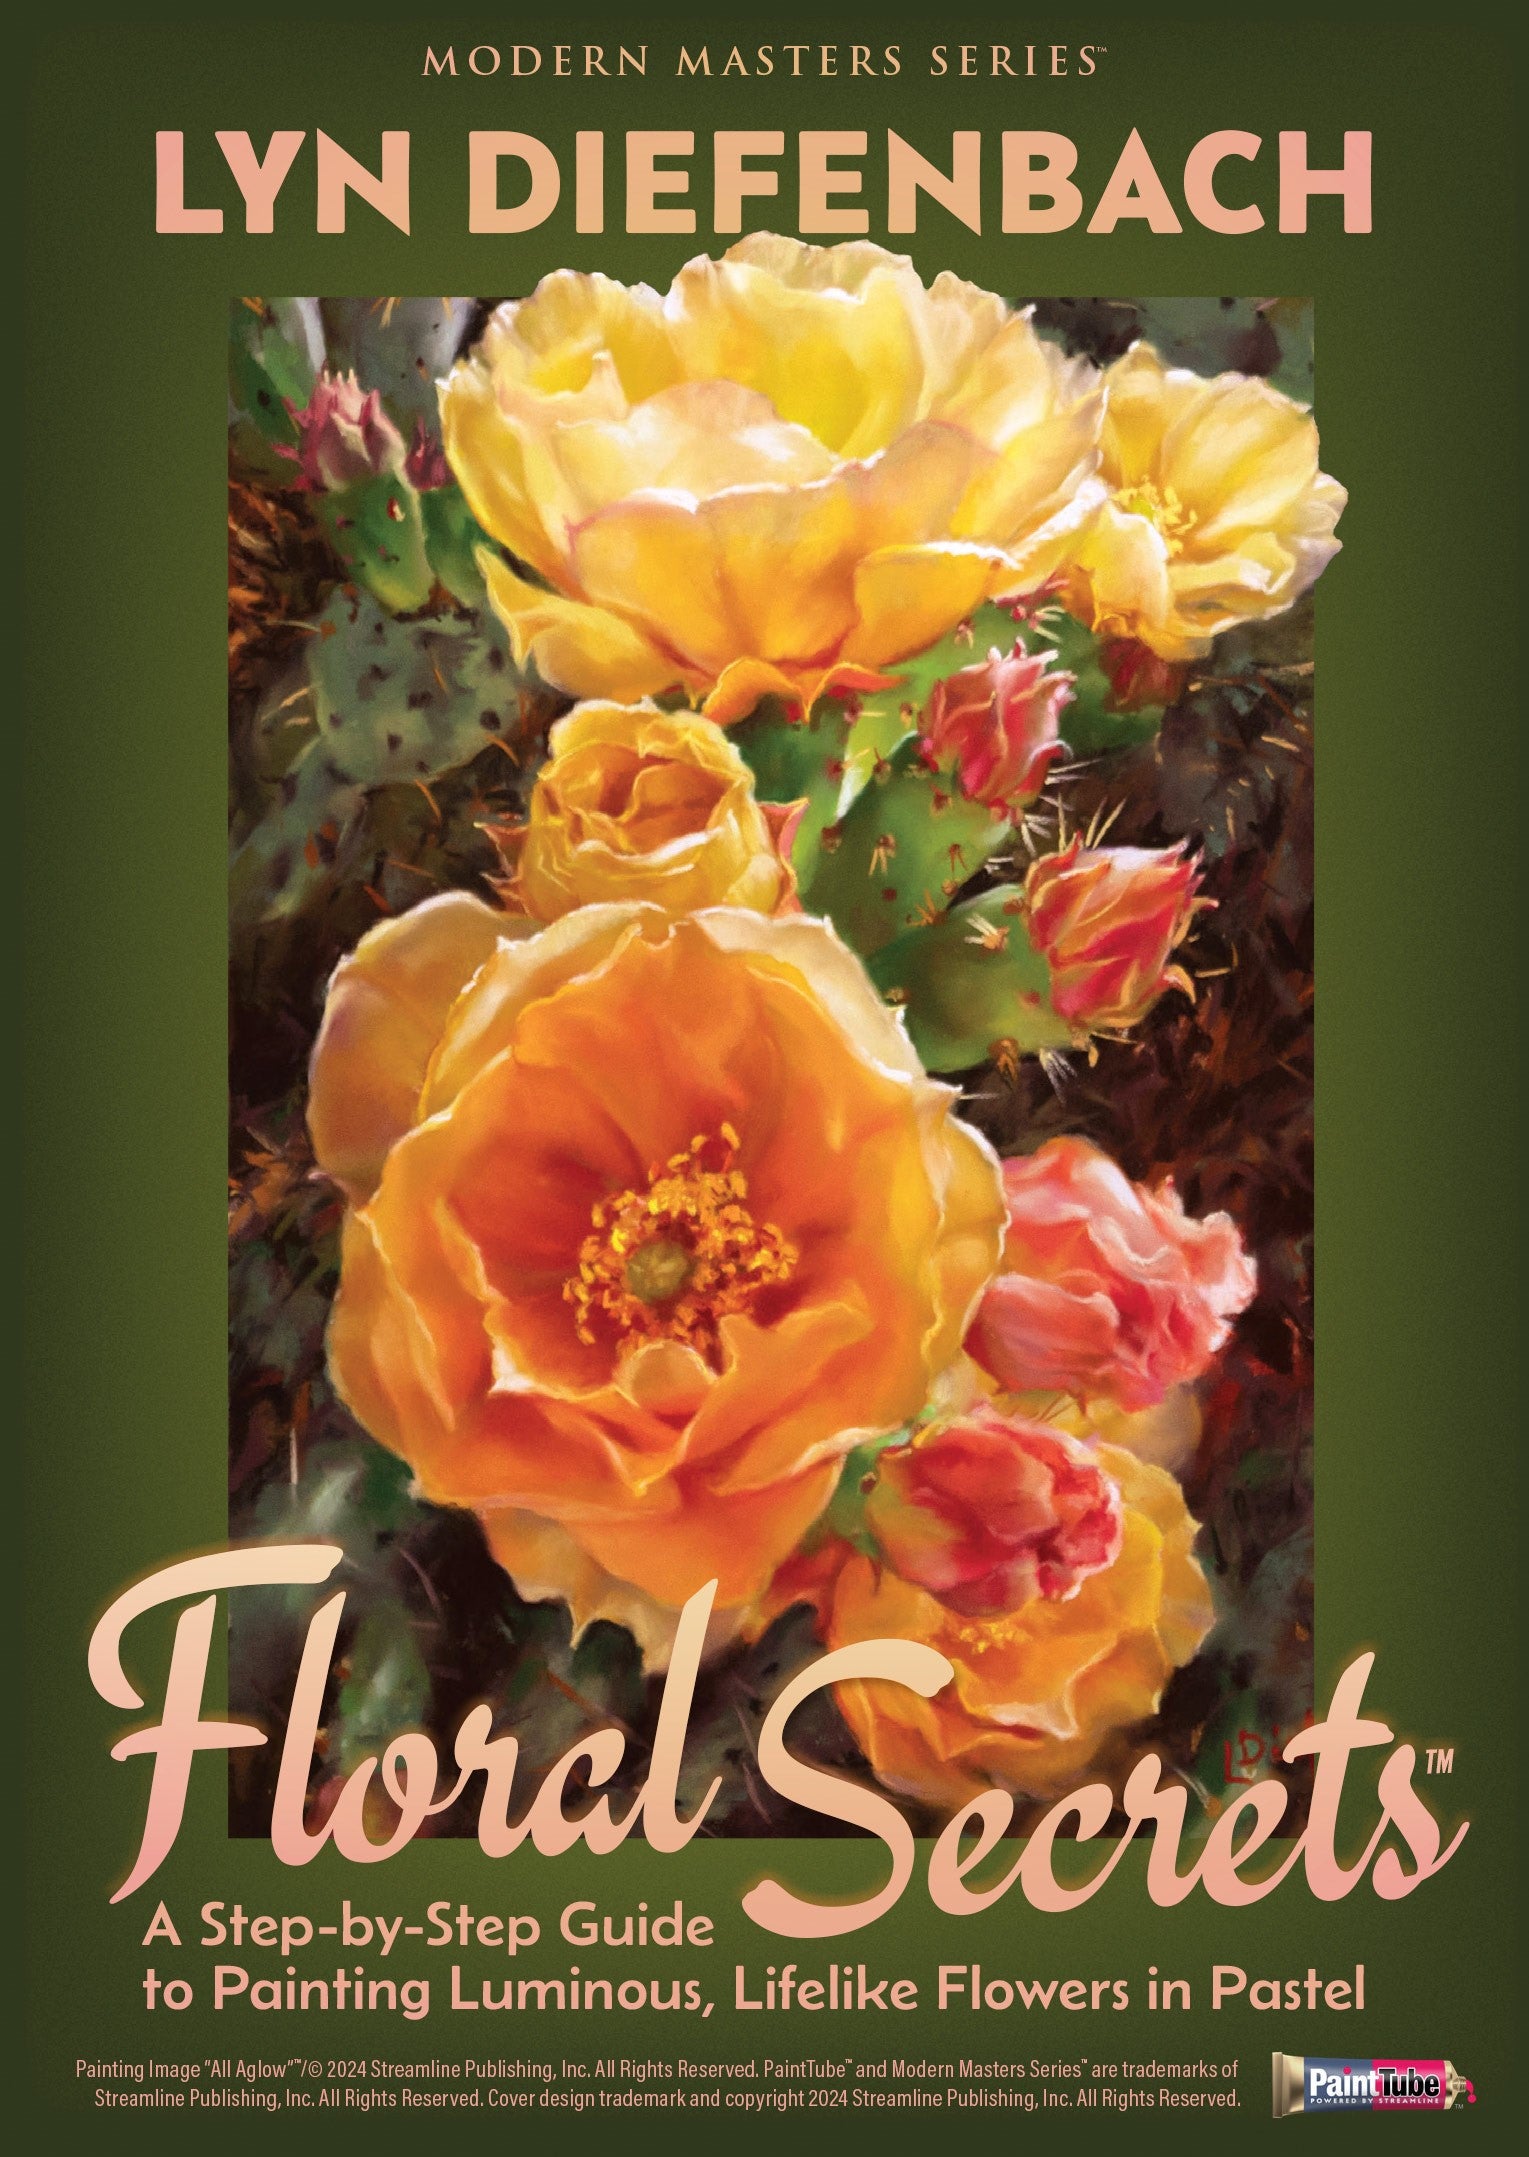 Lyn Diefenbach: Floral Secrets - A Step-by-Step Guide to Painting Luminous, Lifelike Flowers in Pastel